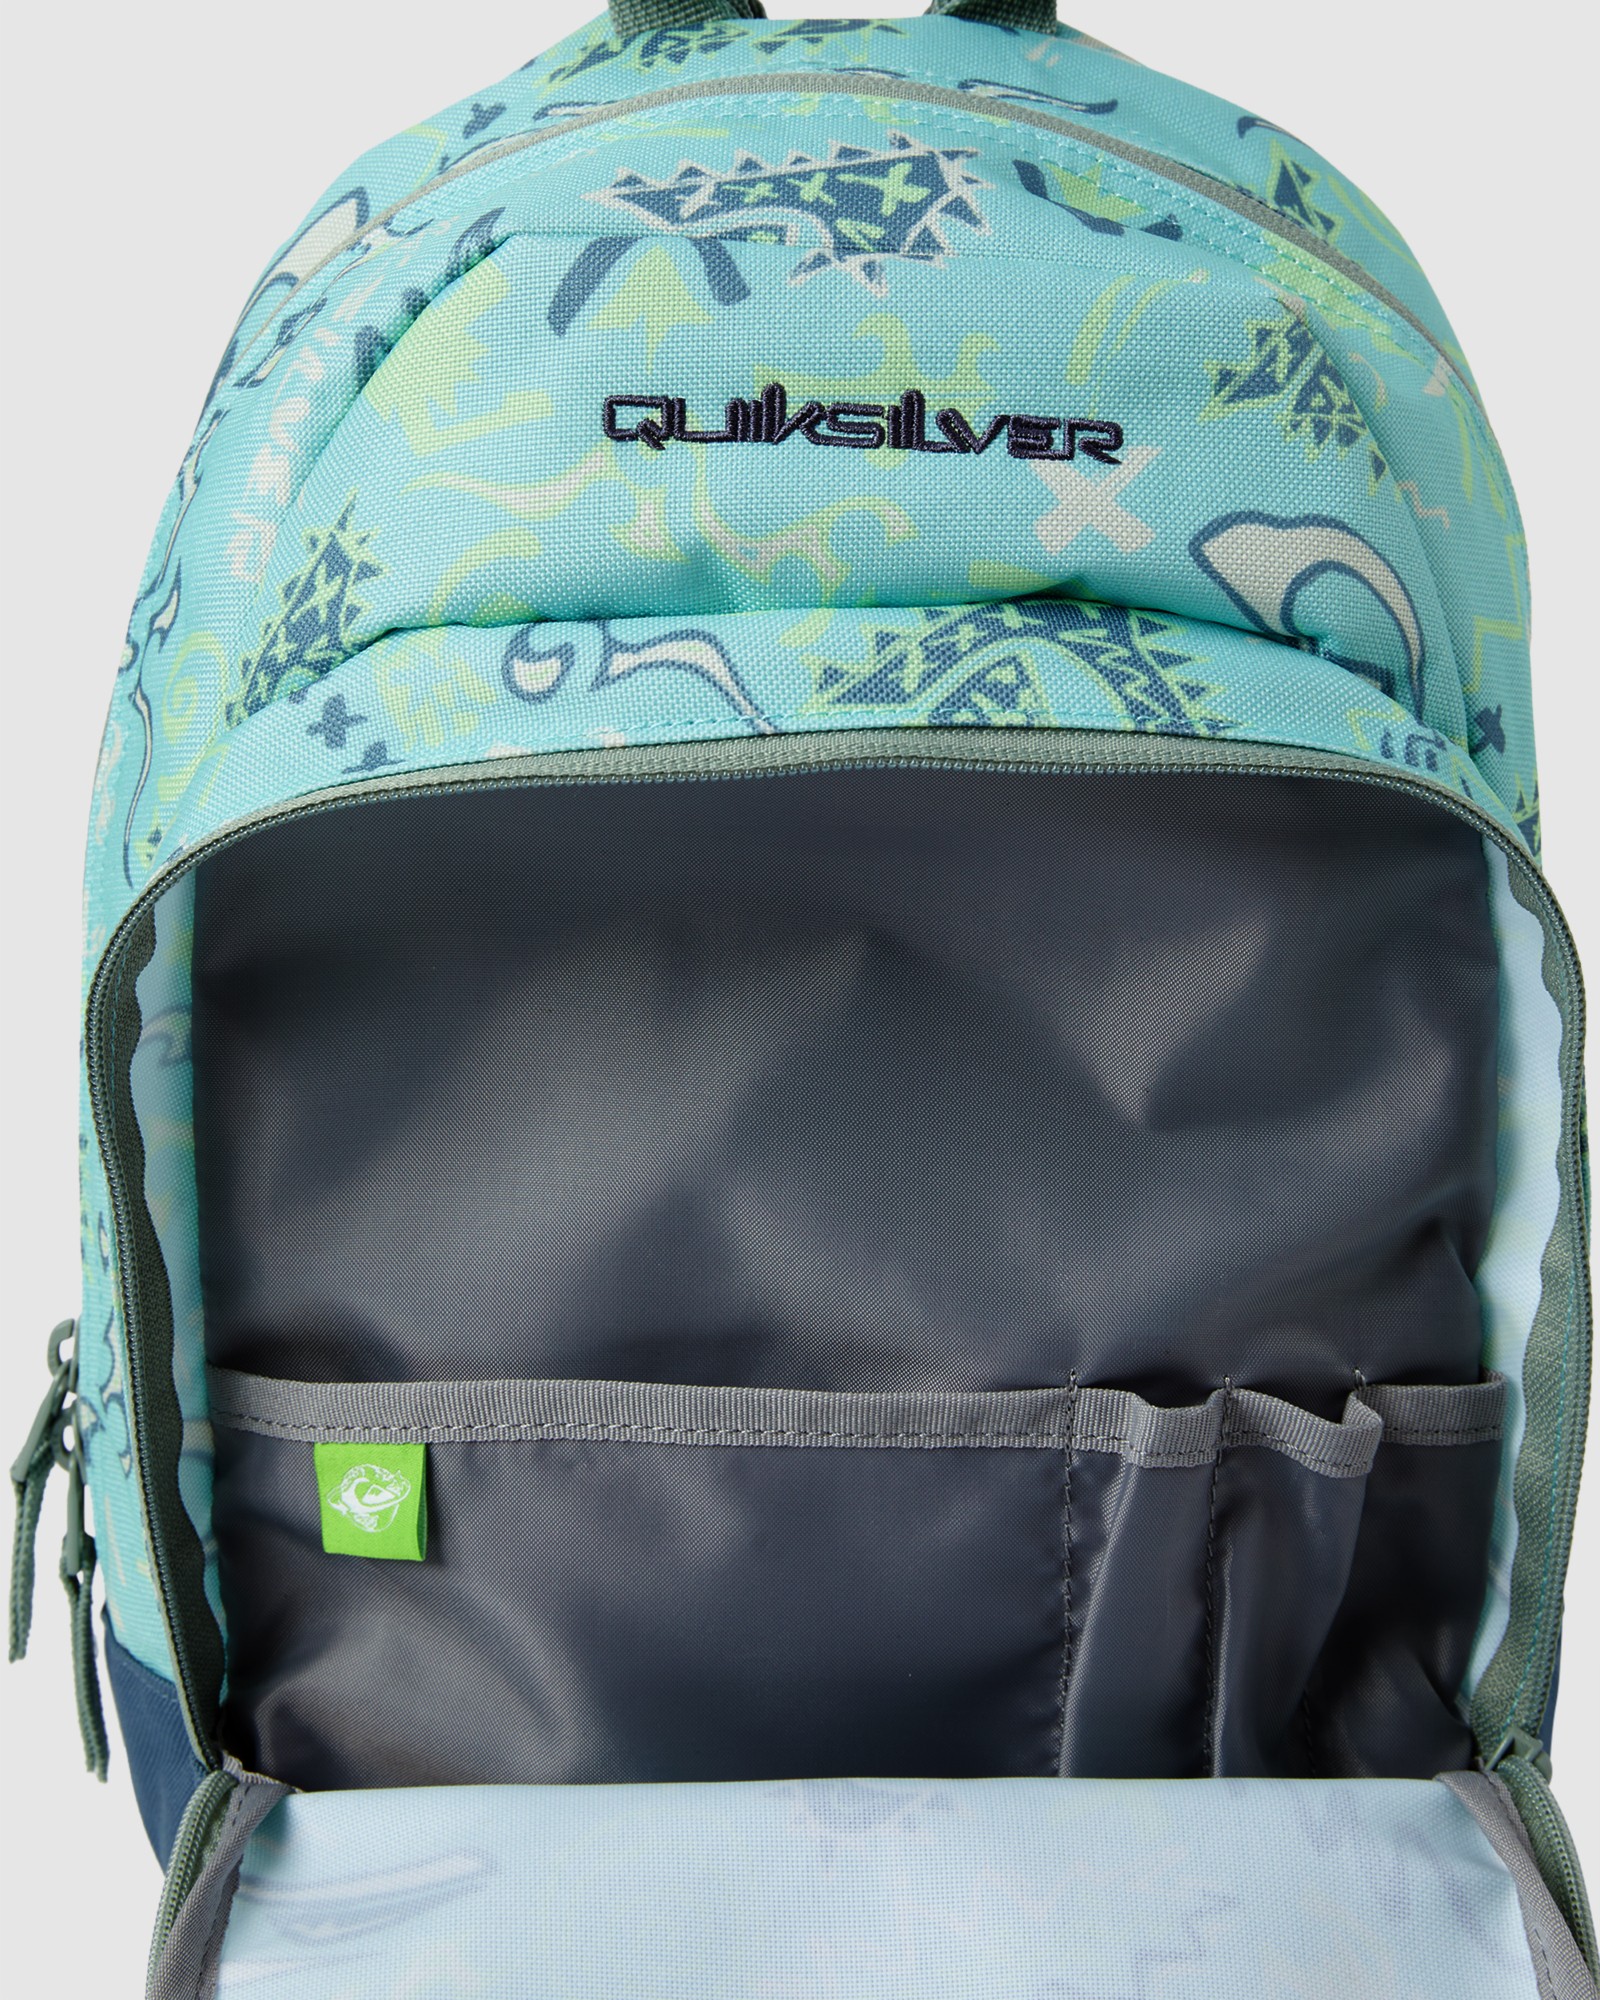 Quiksilver Chomping 12L Small Backpack - Pastel Turquoise | SurfStitch | Henkeltaschen